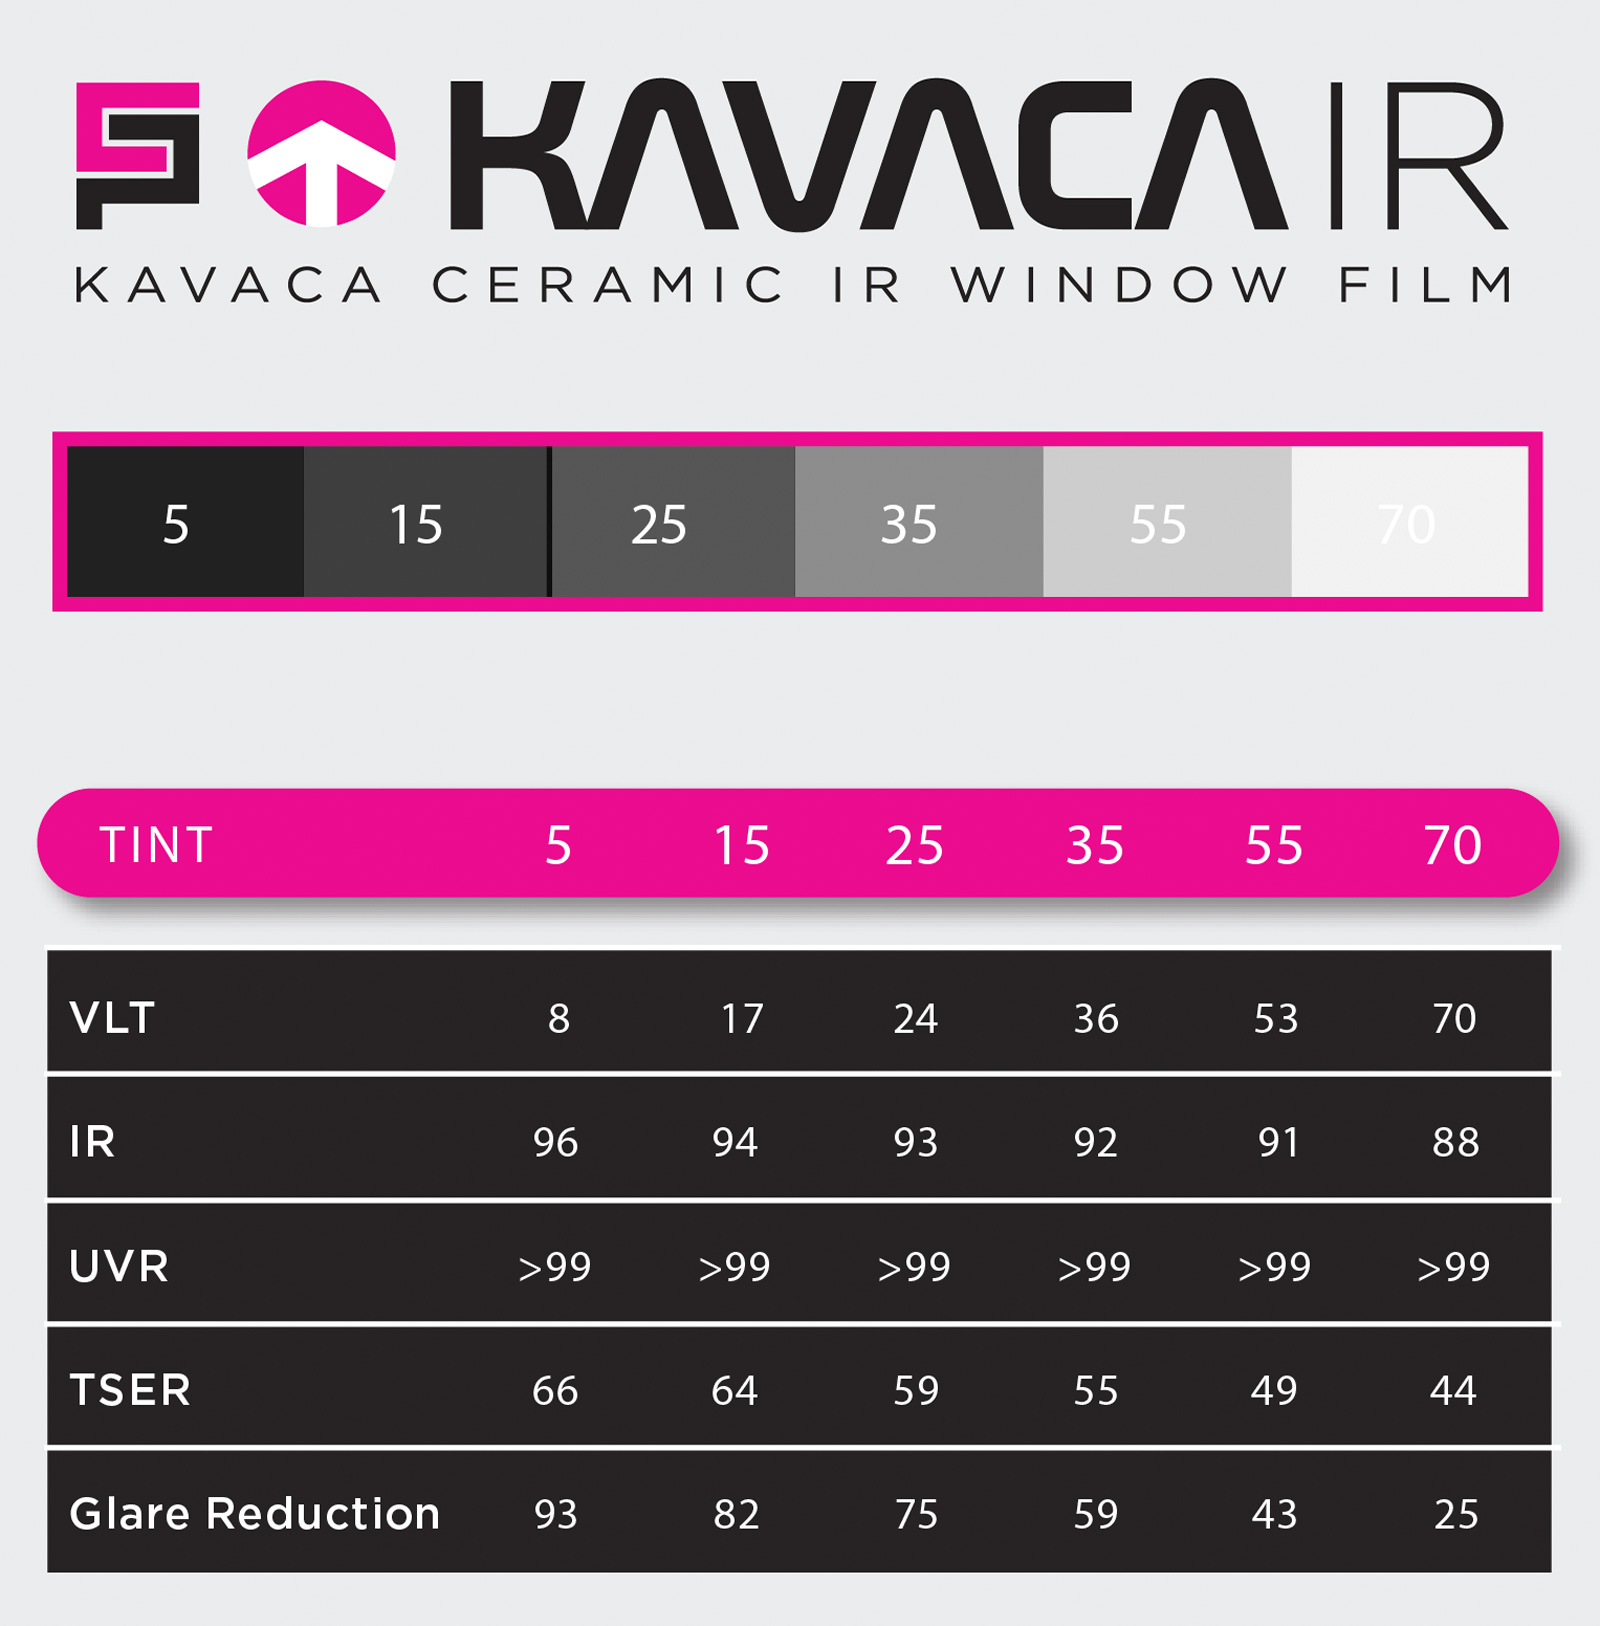  Kavaca Window Tint Near Me. Ceramic Pro Colorado Springs – Car Wraps and Auto Graphics. Questions Call us at ☎️ 719-375-1252 (Monday to Friday 830am to 530pm. Saturday 900am to 1230pm) or Facebook inbox available any time 24hrs ☺️100% Guaranteed · Military Discounts · Certified Trained Technicians · BBB Accredited Business #ceramiccoating #coloradosprings #ceramicprocoloradosprings #KavacaWindowTintNearMeColoradoSprings #KavacaWindowTintNearMeColoradoSpringsDenverColorado#denvercolorado